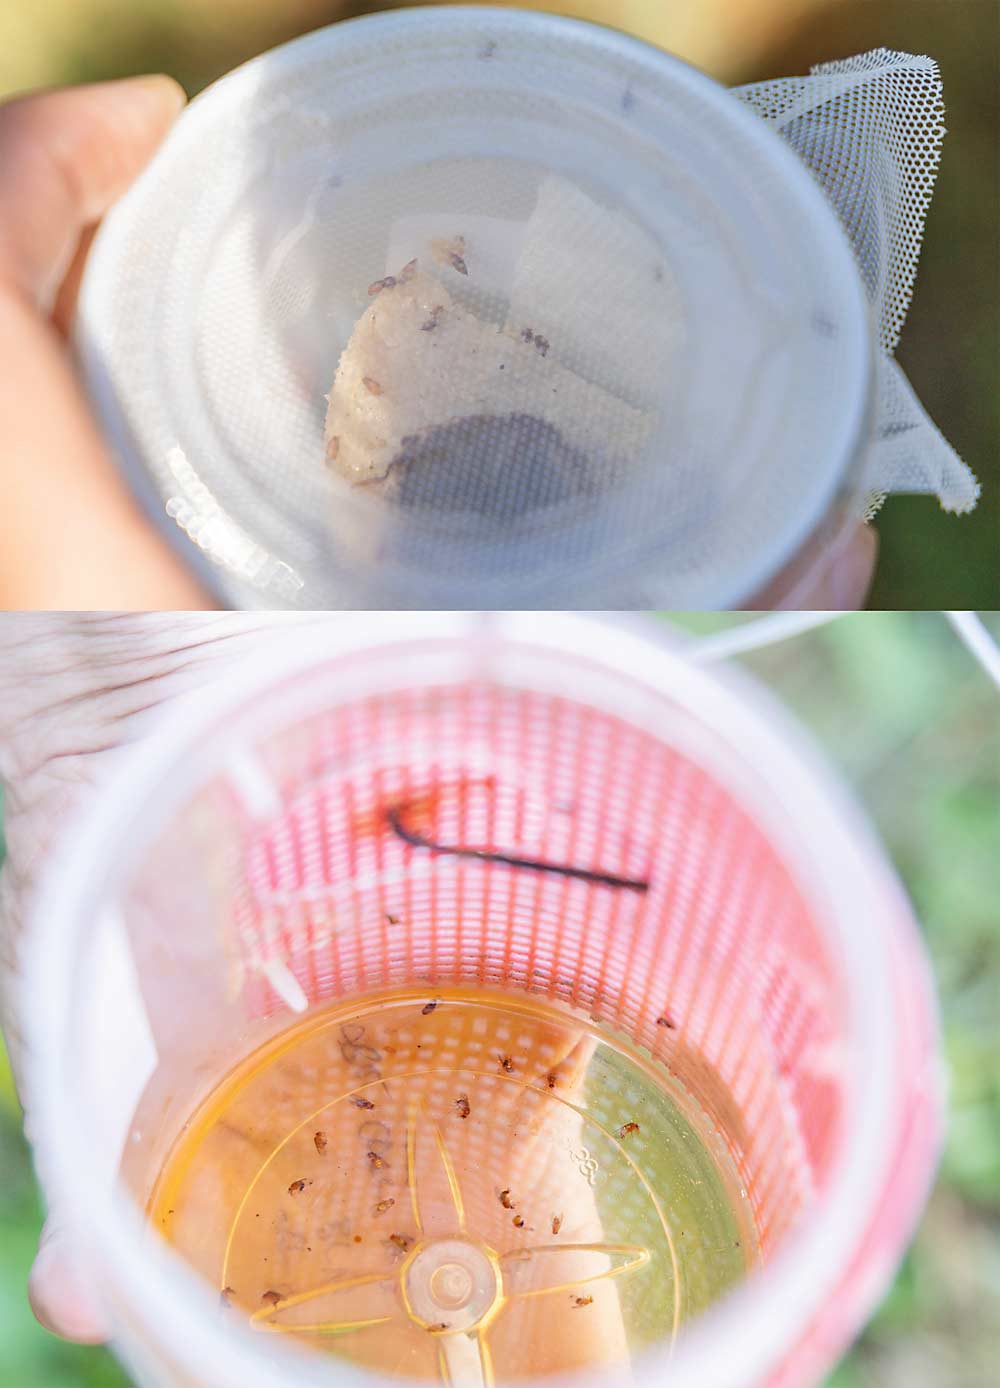 It takes two types of traps to monitor for SWD parasitism: the “sentinel traps,” above, which are small white cups containing SWD adults, larvae and pupae, along with blueberries, that the researchers leave in the field for a week and then check for signs of parasitism; and the larger “death traps,” right, which are peanut butter jars filled with a mix of wine and apple cider vinegar that help to track SWD pressure at each location. (Kate Prengaman/Good Fruit Grower)